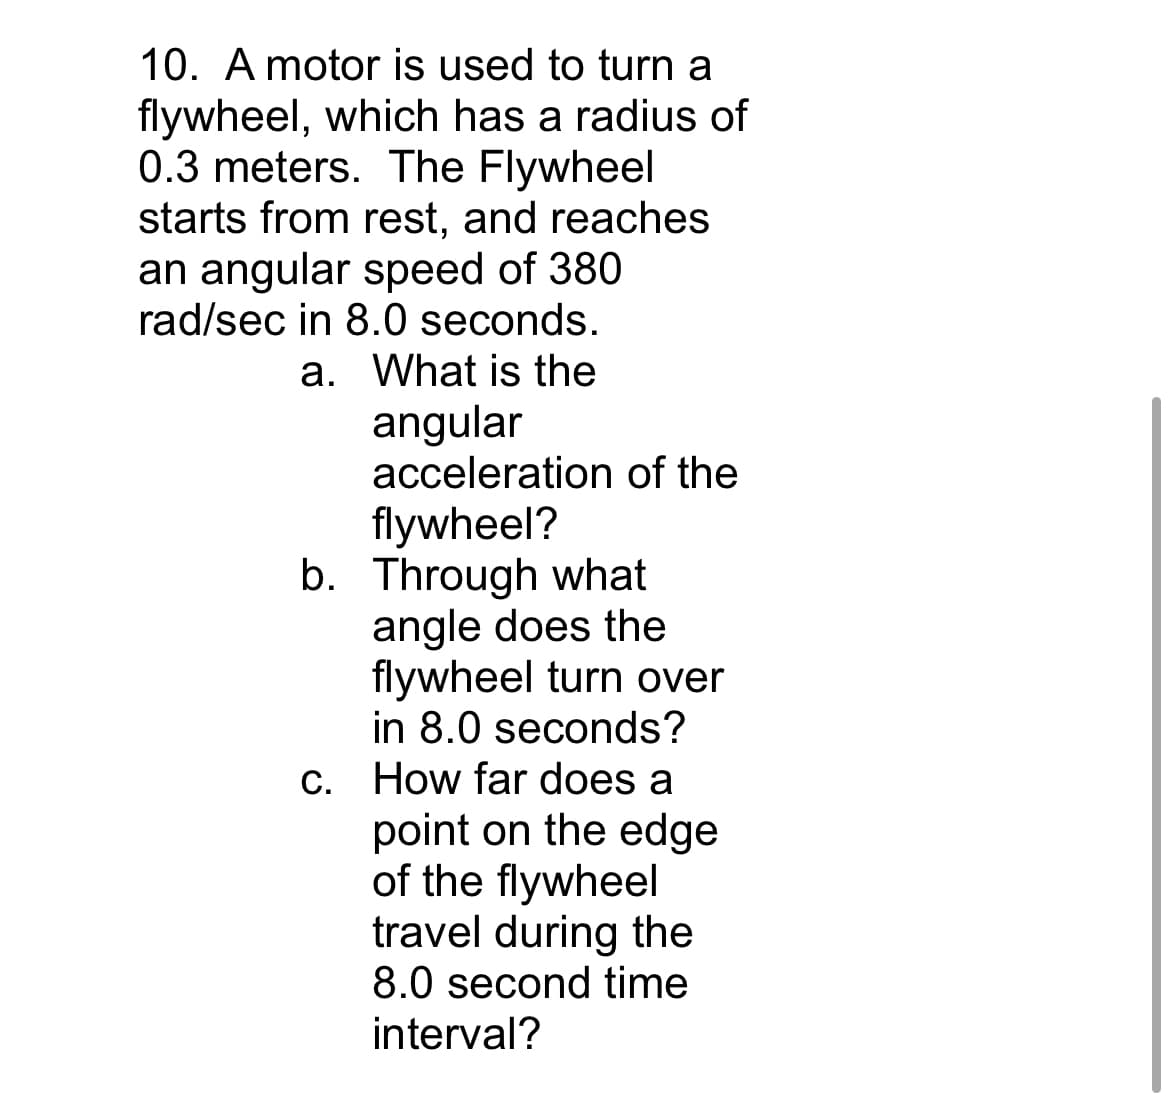 10. A motor is used to turn a
flywheel, which has a radius of
0.3 meters. The Flywheel
starts from rest, and reaches
an angular speed of 380
rad/sec in 8.0 seconds.
a. What is the
angular
acceleration of the
flywheel?
b. Through what
angle does the
flywheel turn over
in 8.0 seconds?
c. How far does a
point on the edge
of the flywheel
travel during the
8.0 second time
interval?
